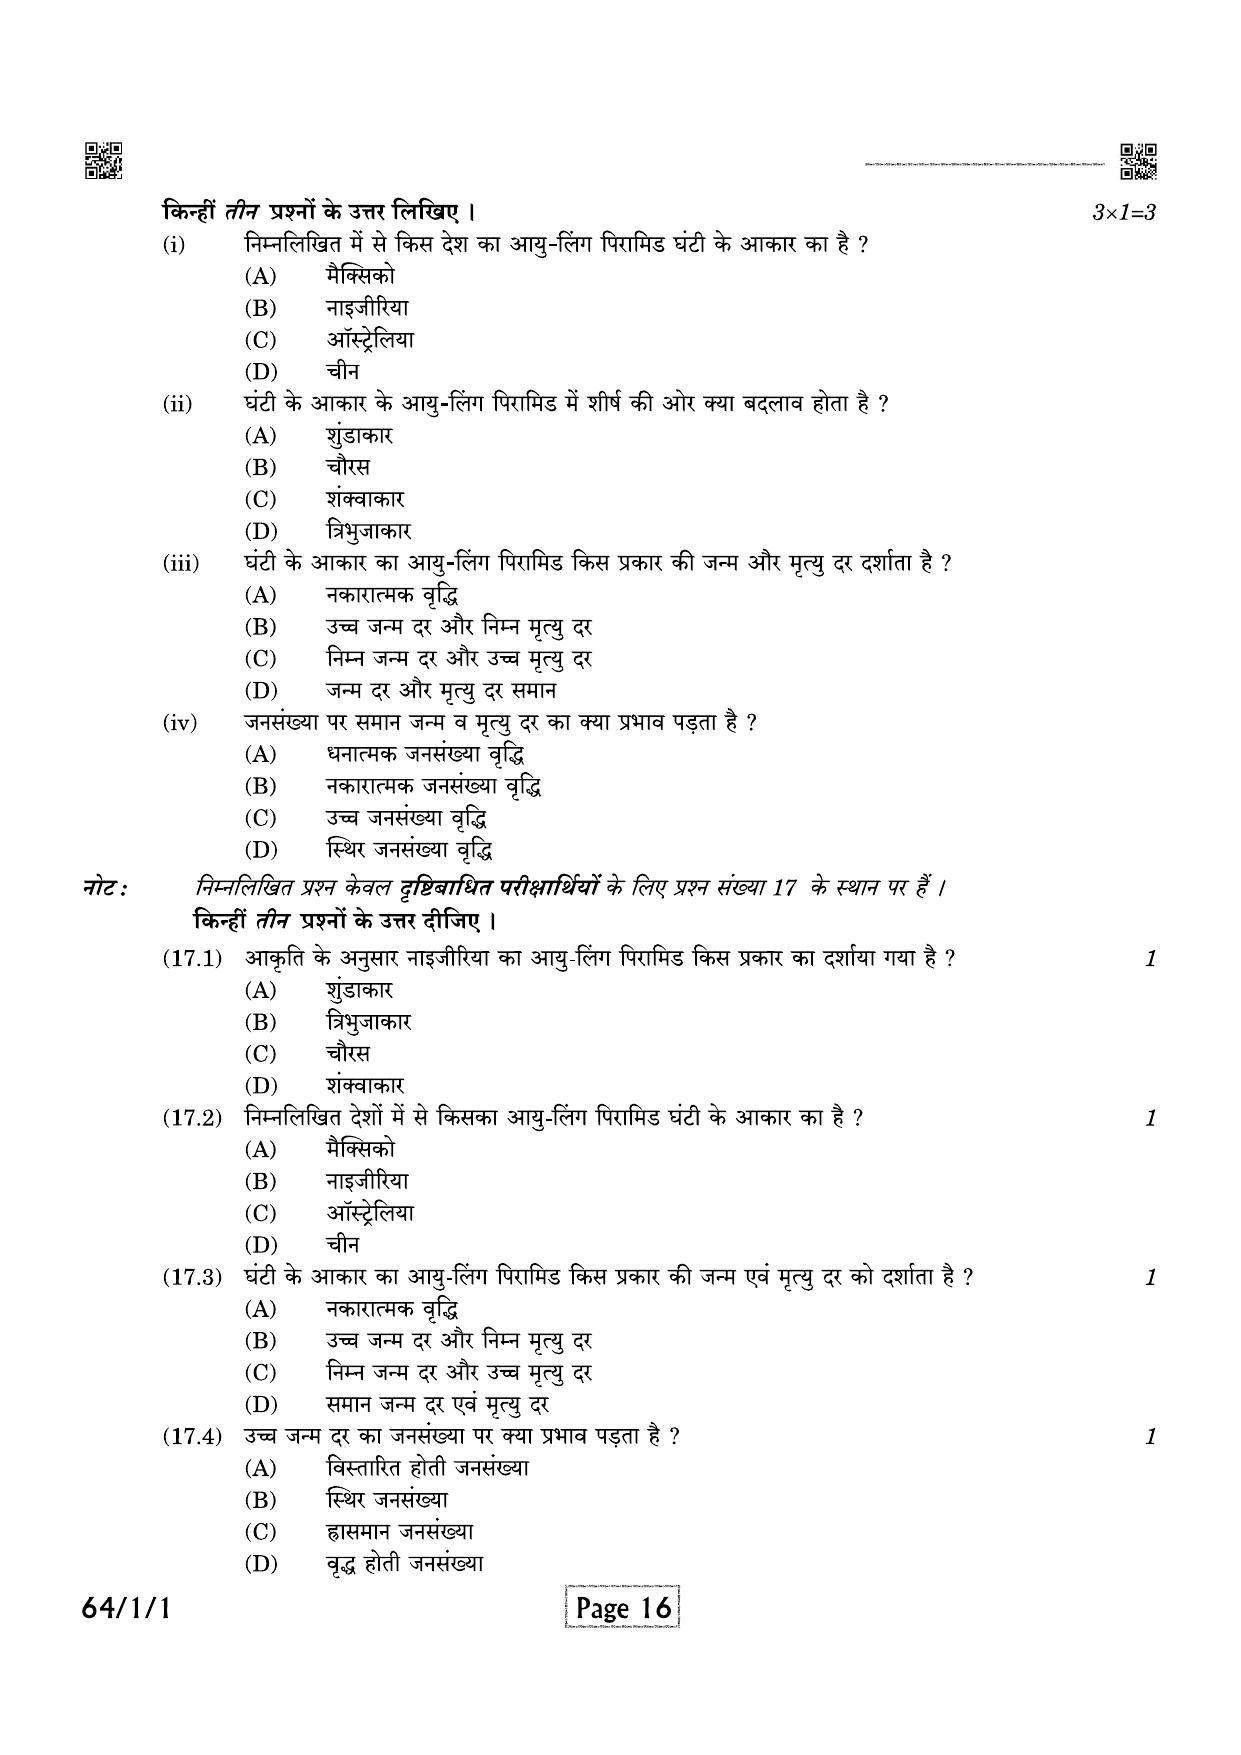 CBSE Class 12 QP_029_Geography 2021 Compartment Question Paper - Page 16